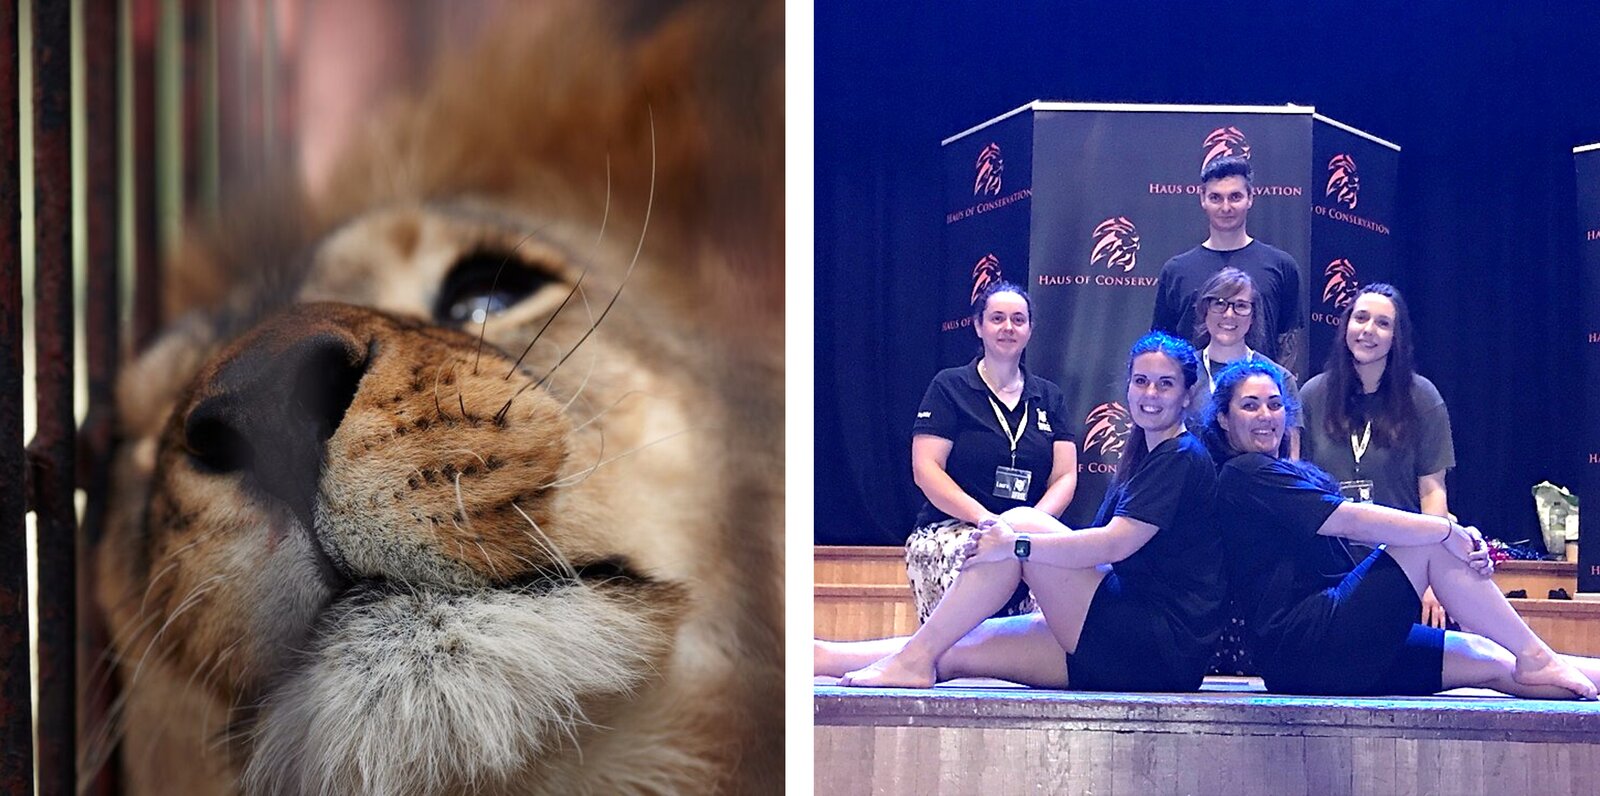 Two photos side by side: One shows a captive lion sleepily looking through bars and the other shows a group of dancers on stage